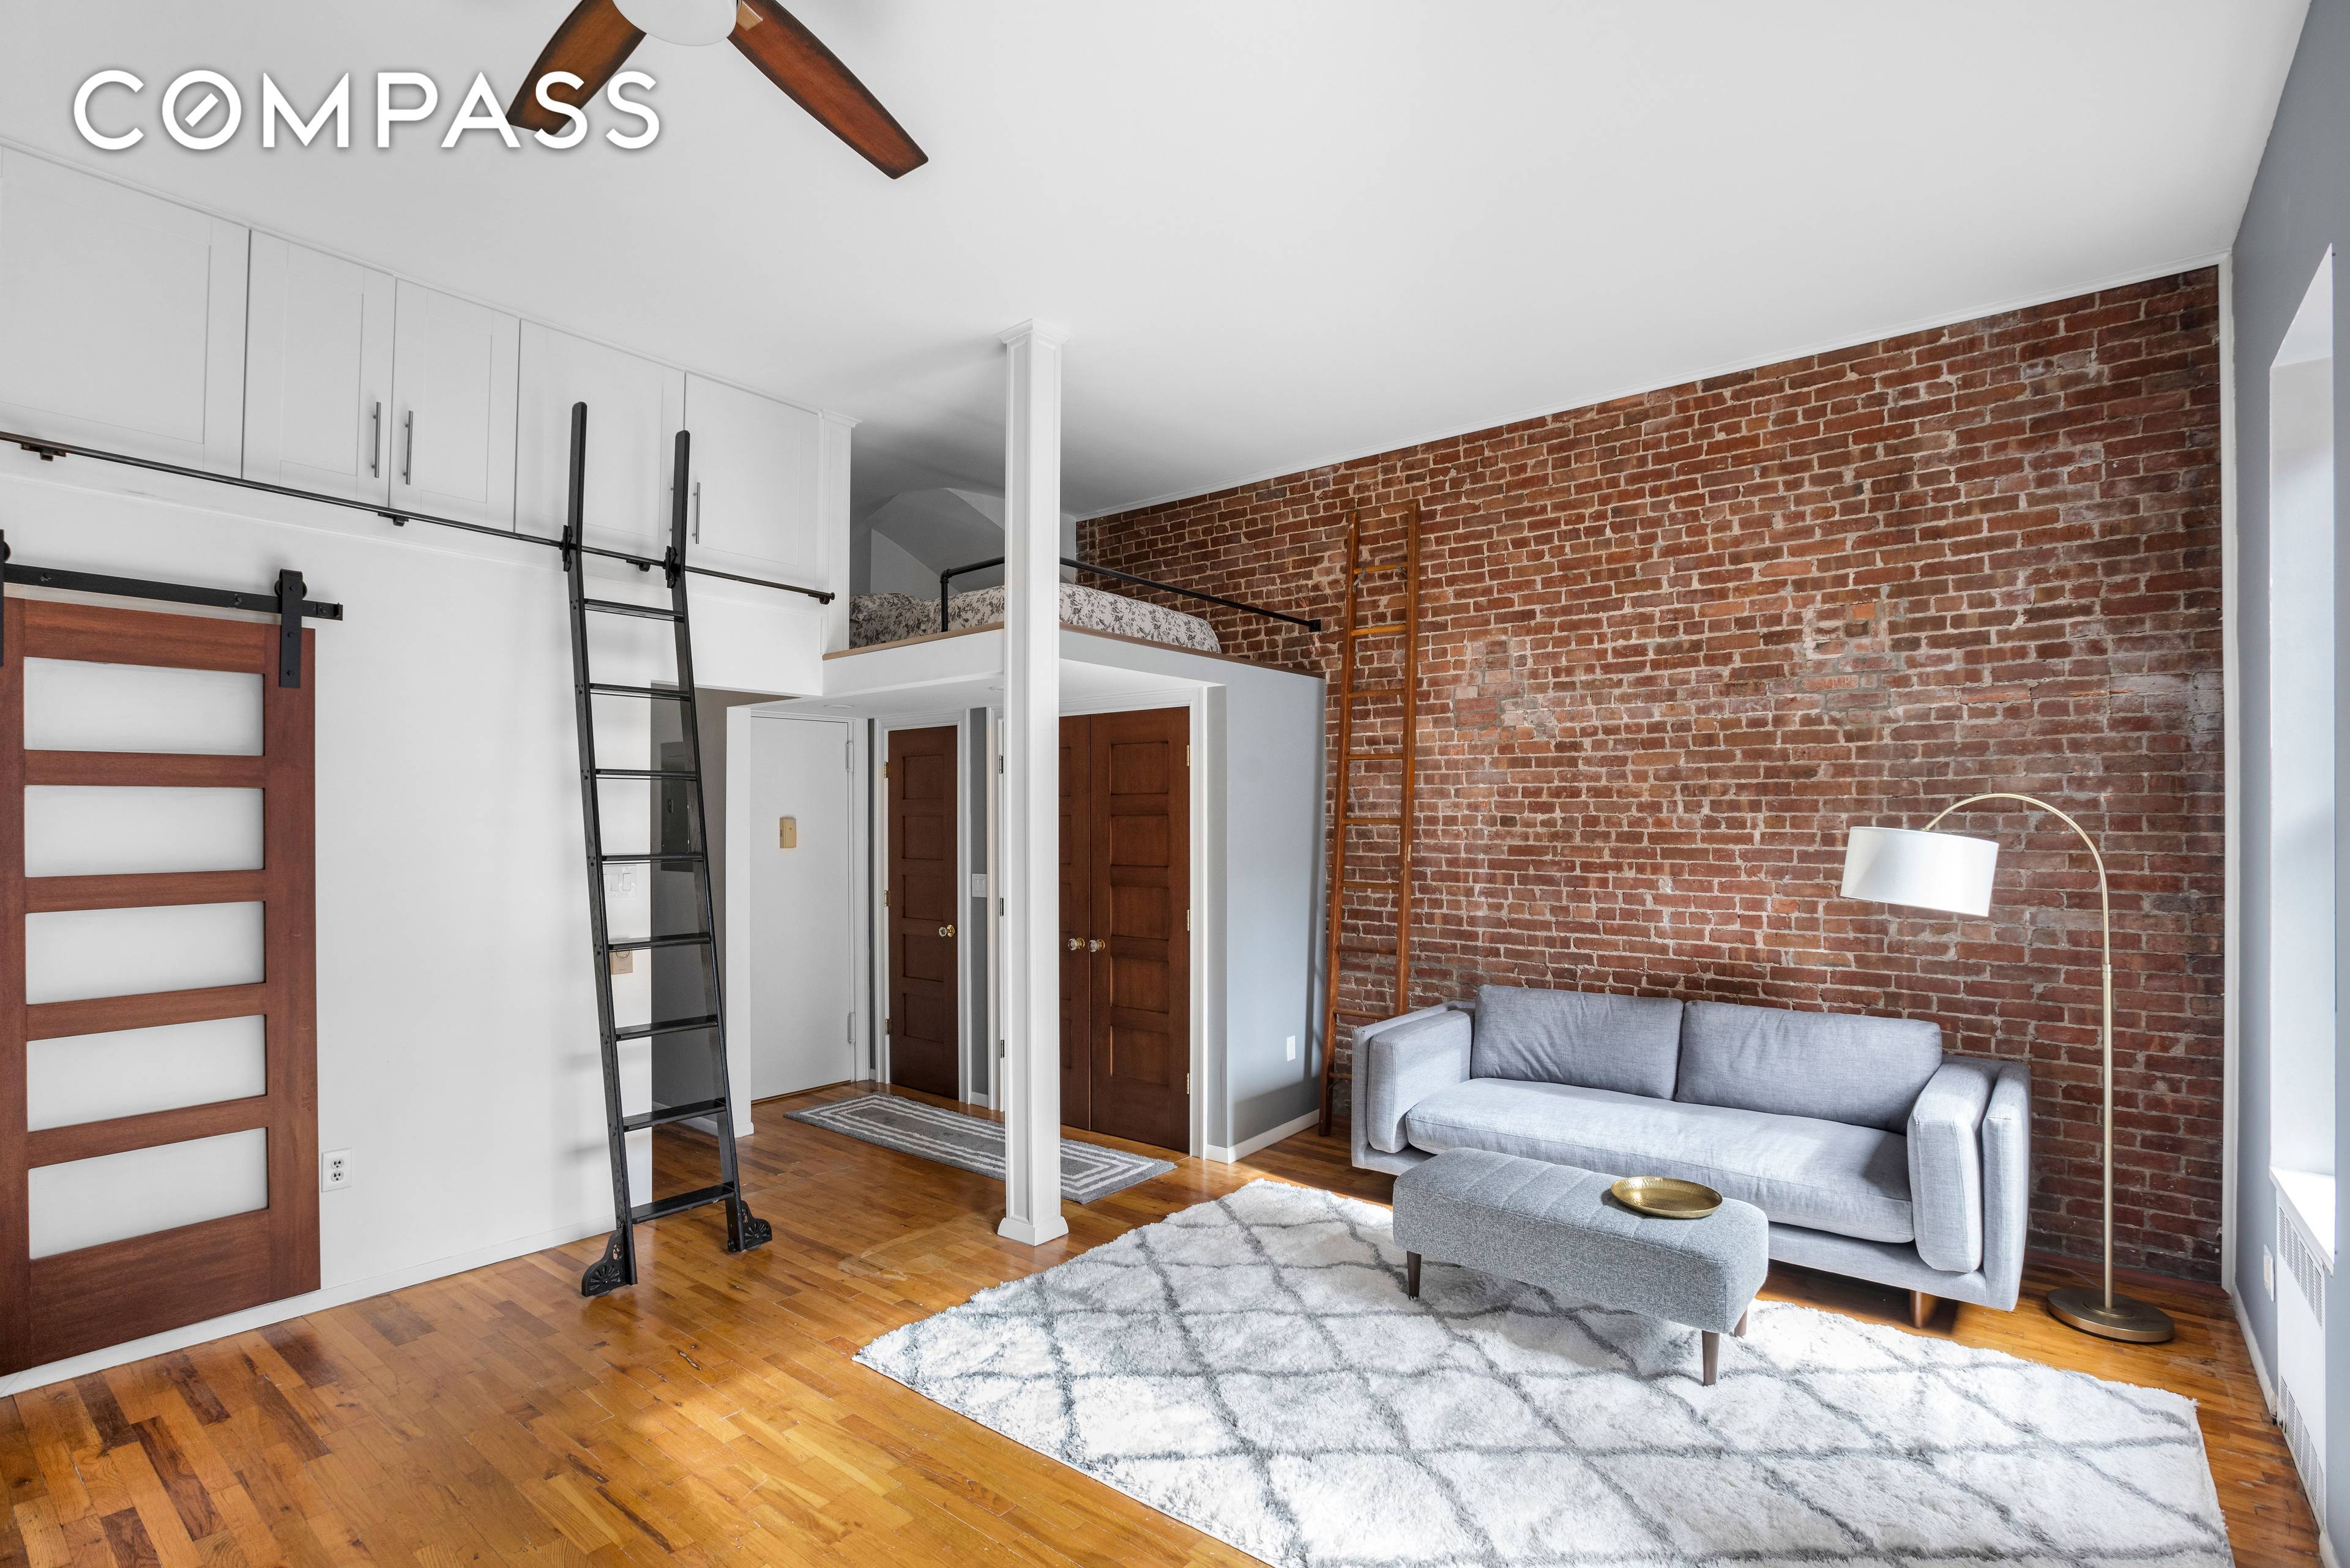 Live in an exquisite lofted home, just one flight up in a gorgeous historic brownstone in one of the best New York City neighborhoods !